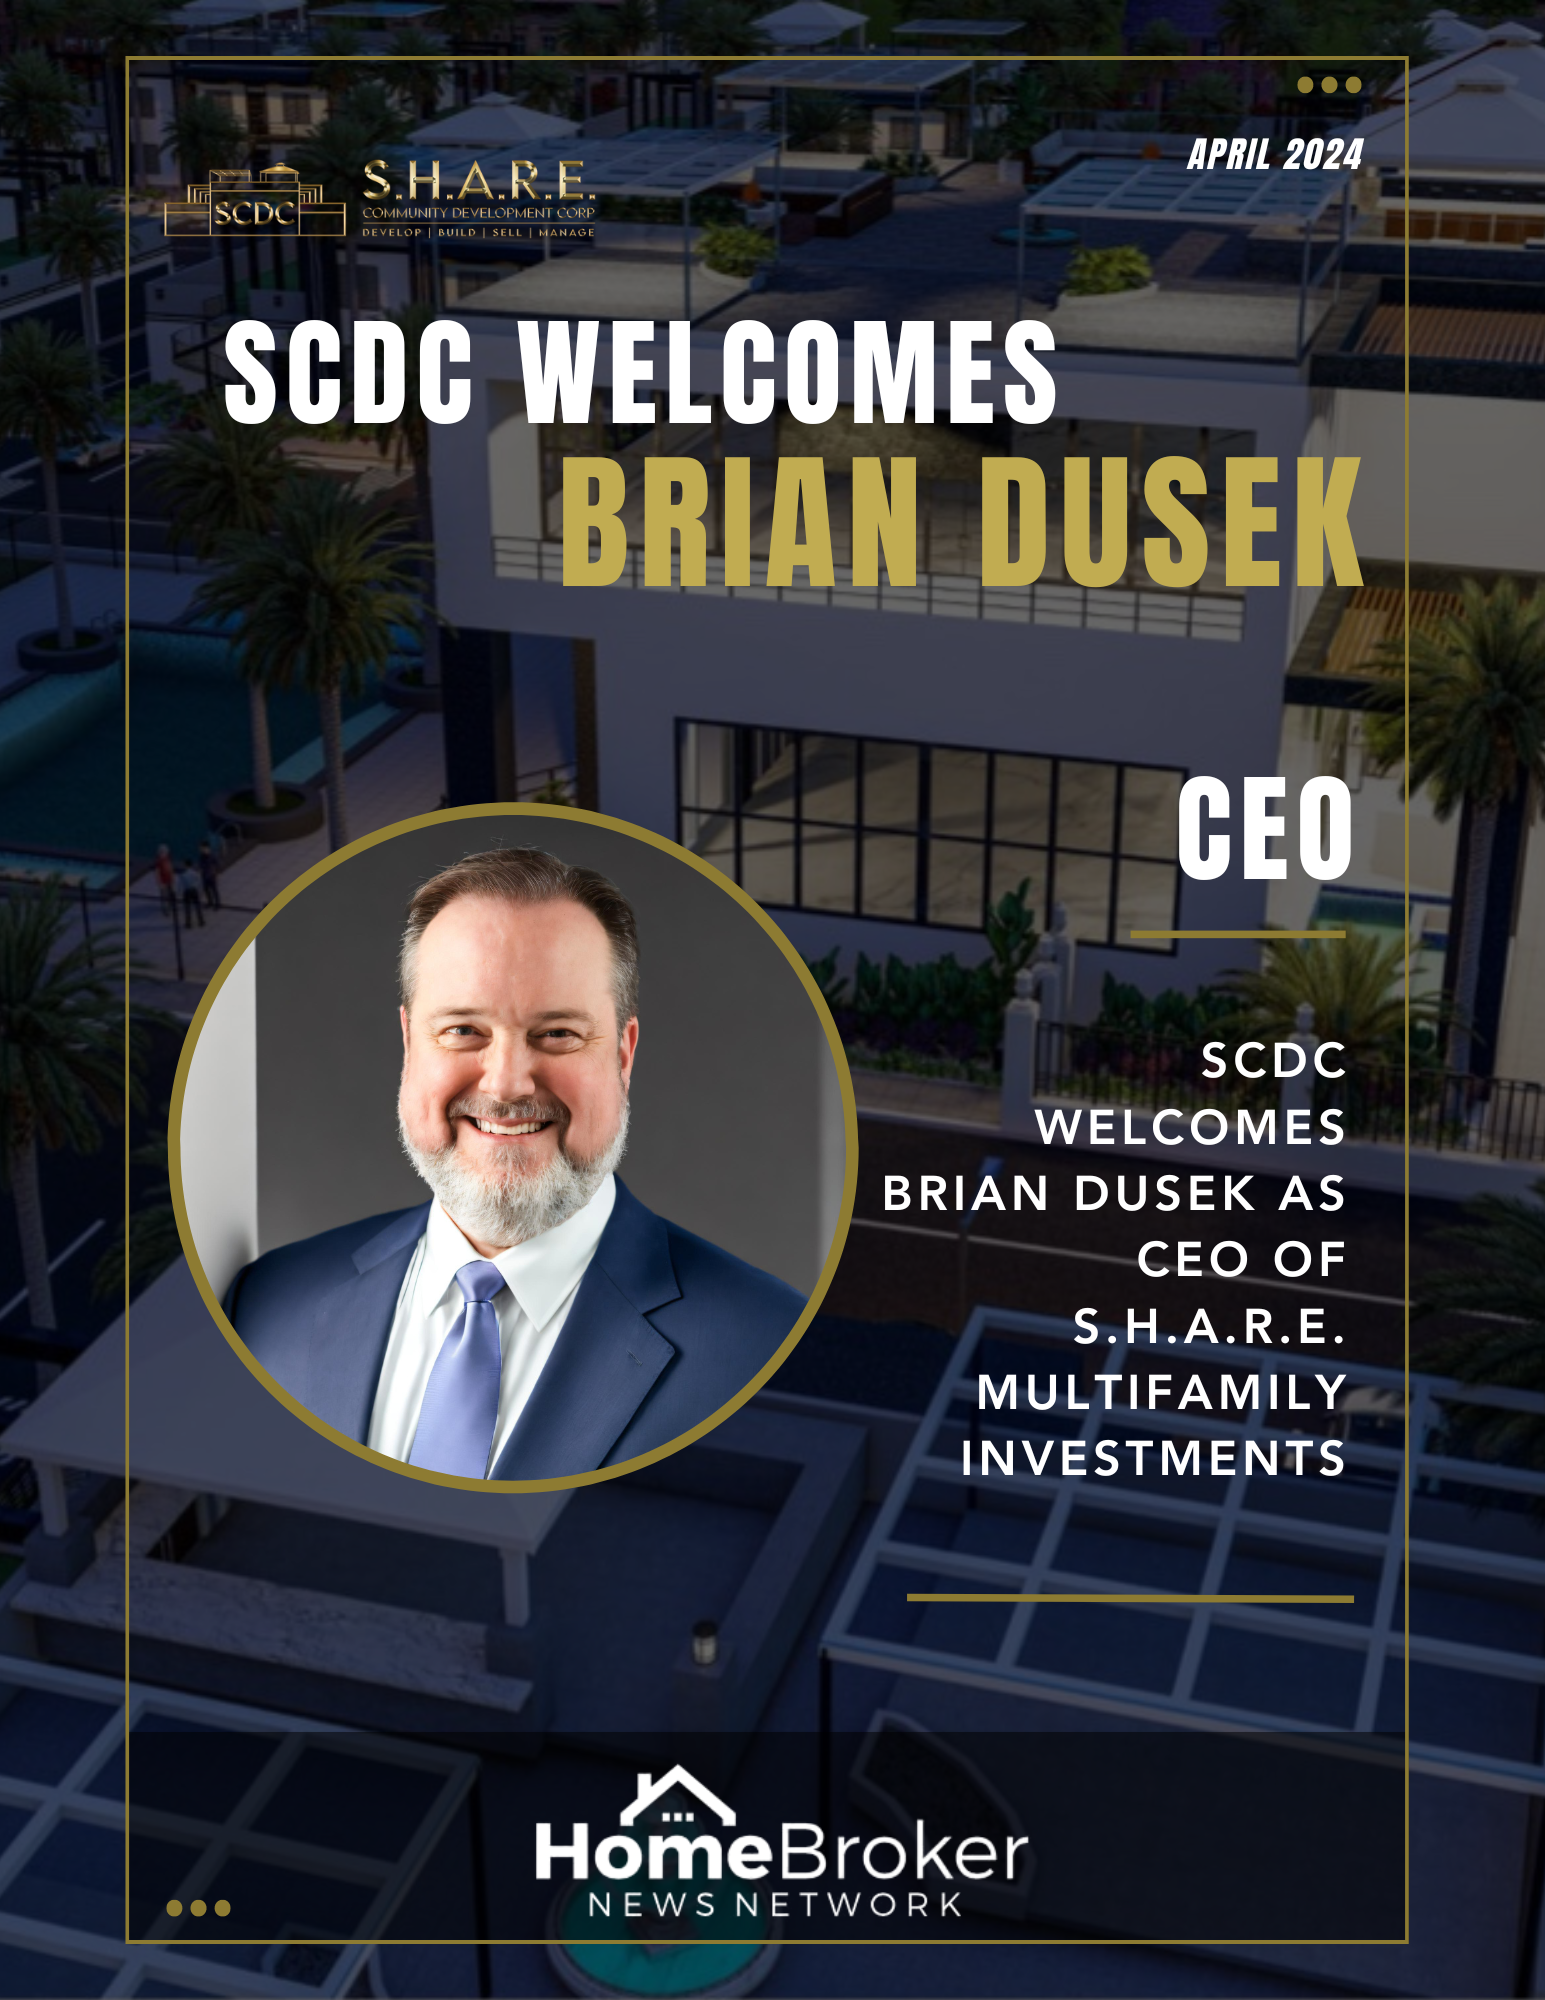 SCDC NAMES BRIAN DUSEK AS CEO OF S.H.A.R.E. MULTIFAMILY INVESTMENTS, USHERING IN A NEW ERA OF STRATEGIC LEADERSHIP